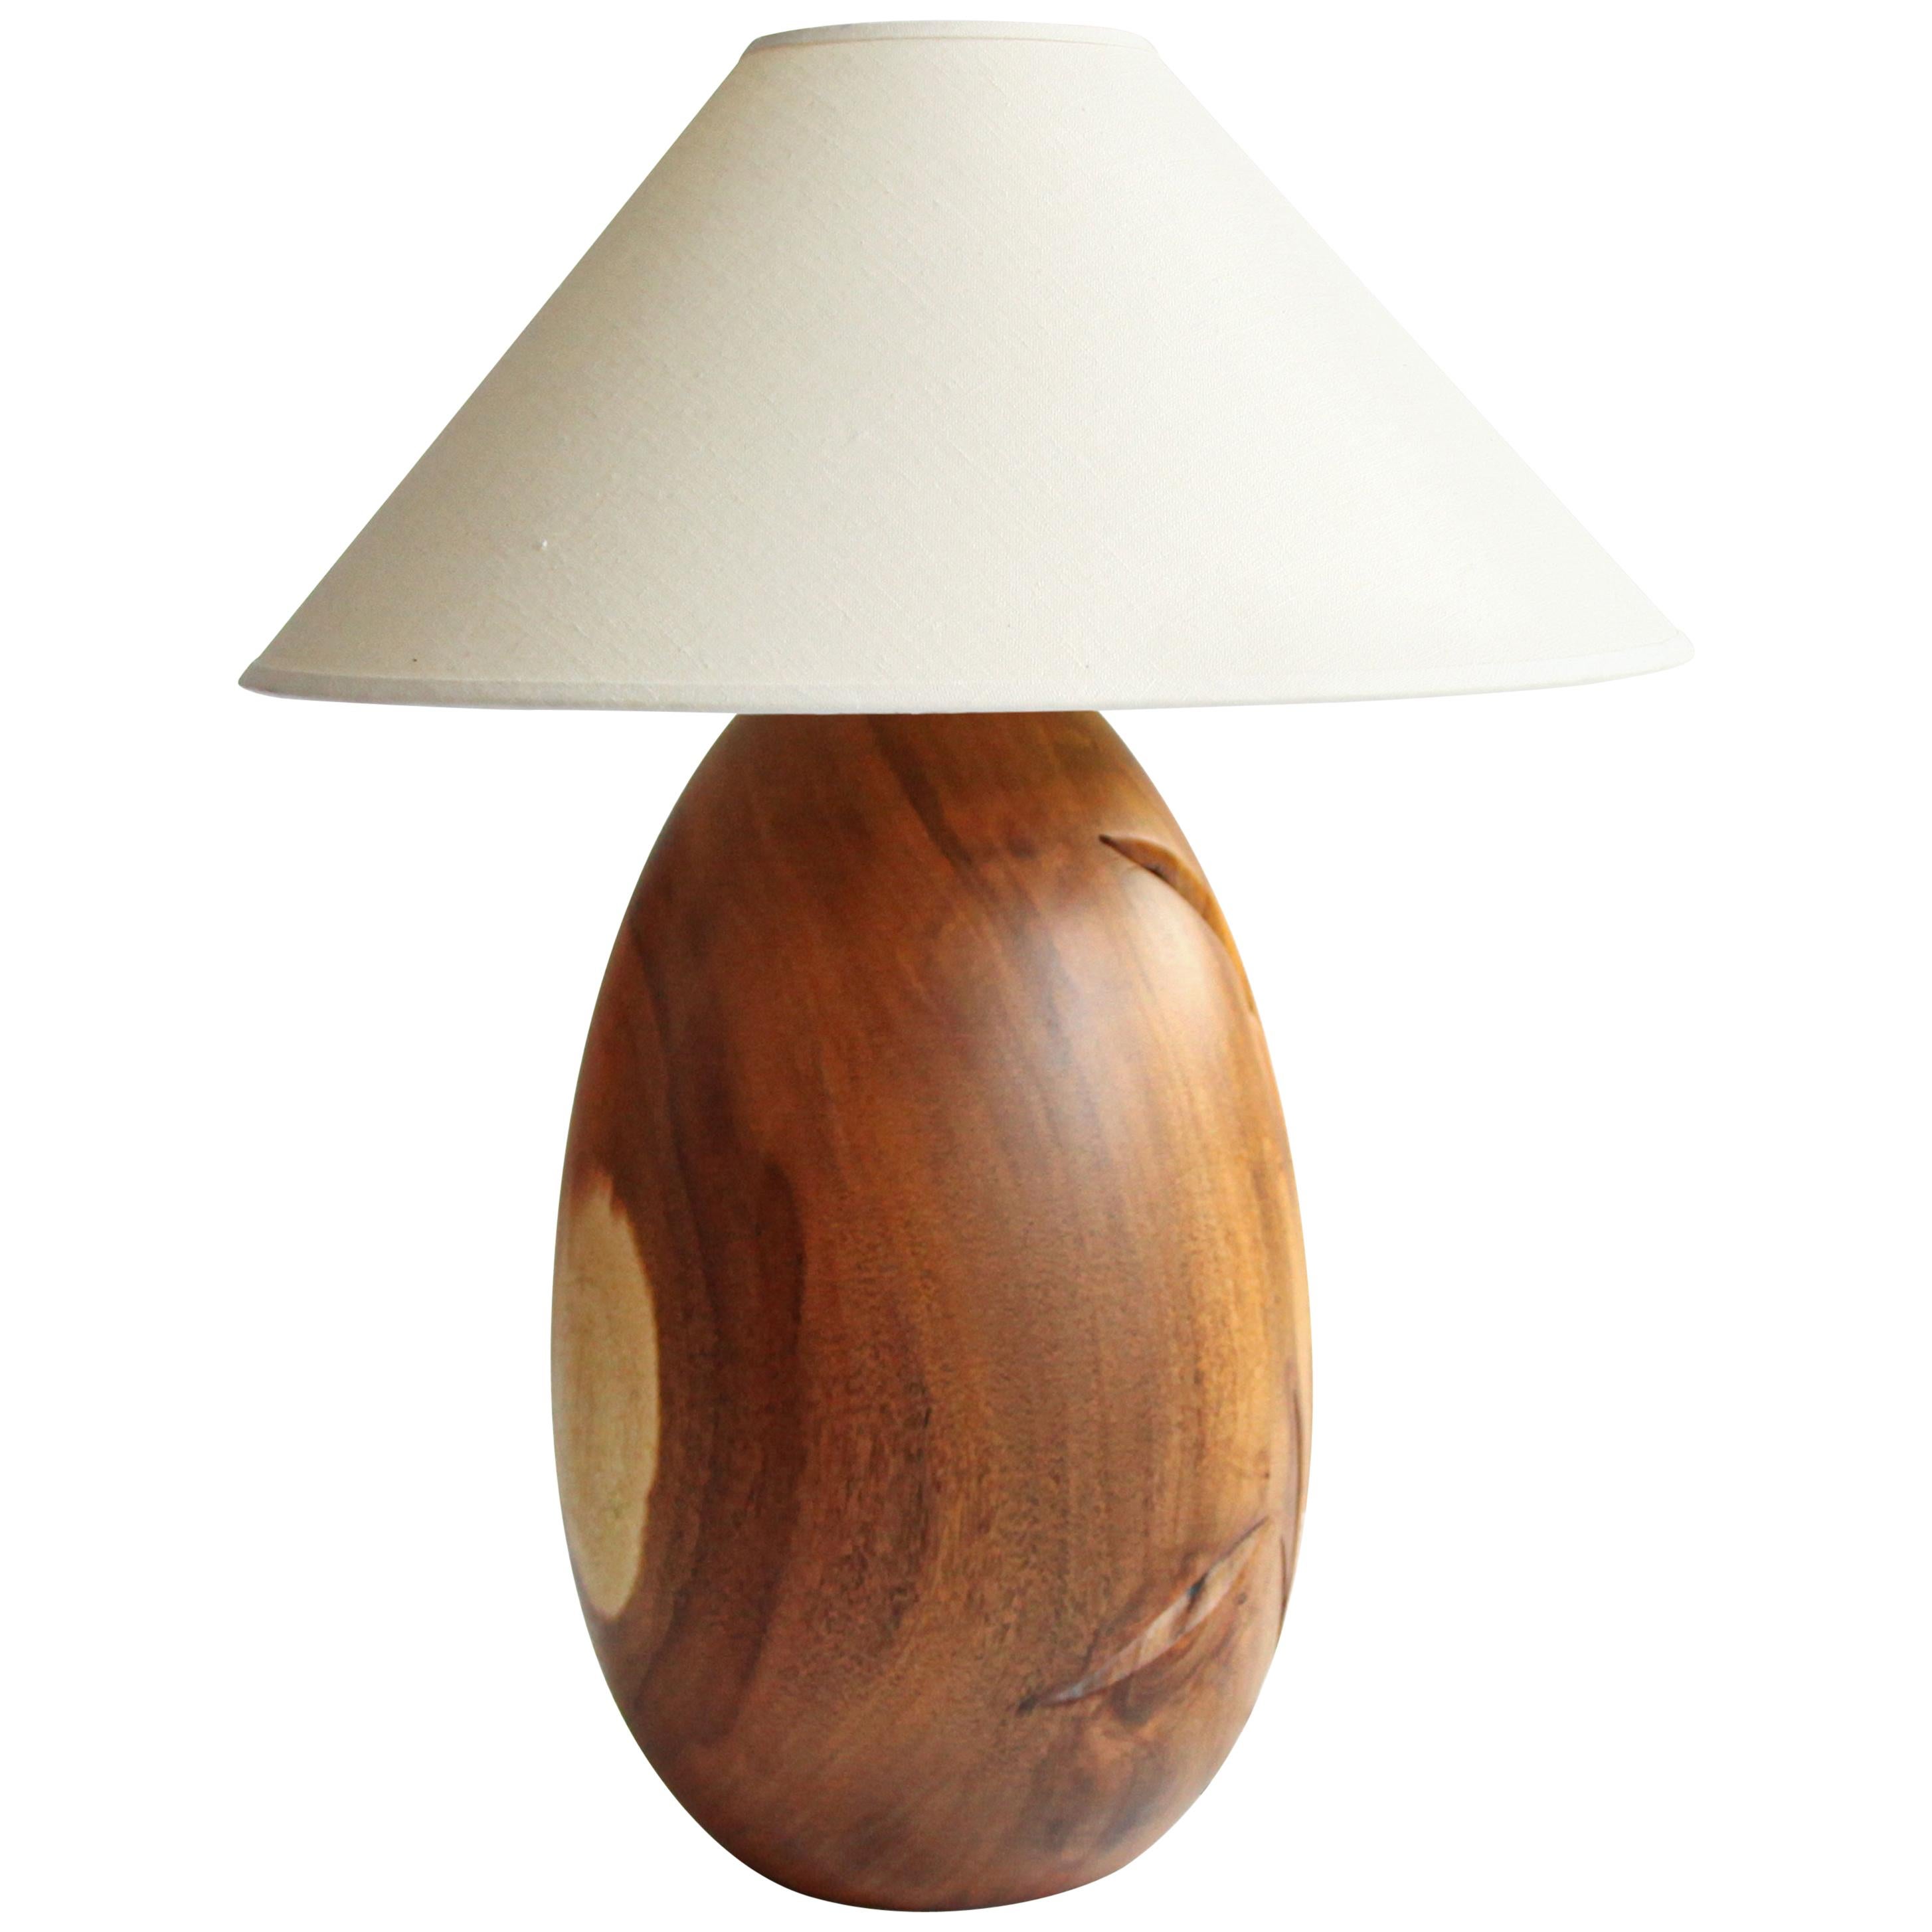 Tropical Hardwood Lamp + White Linen Shade, Large, Árbol Collection, 34